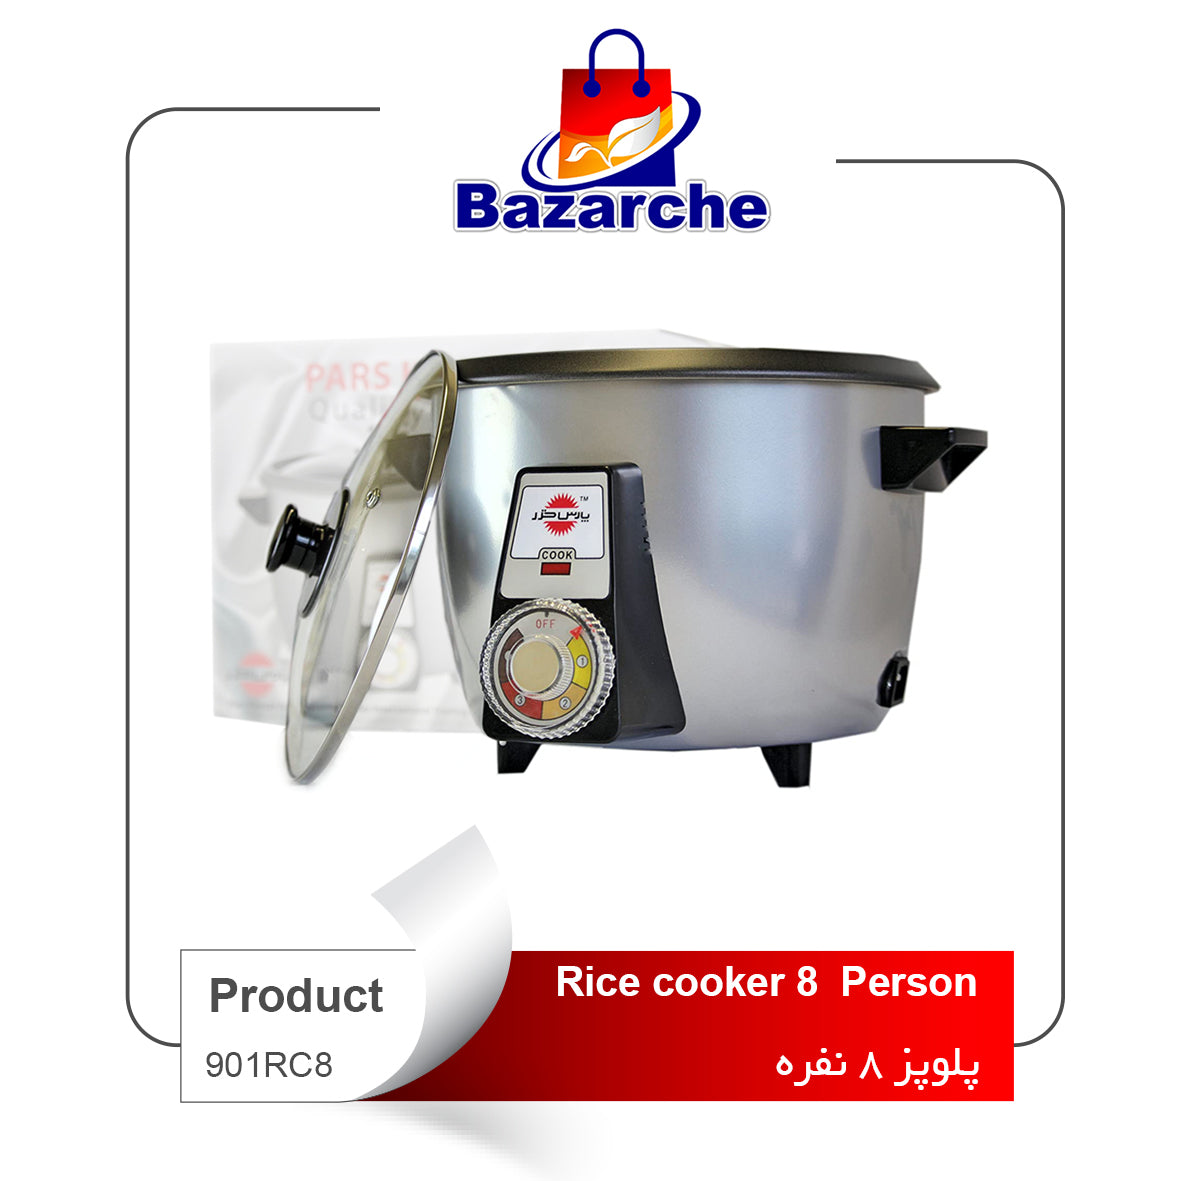 Rice cooker 8   Person(پلوپز ۸نفره)